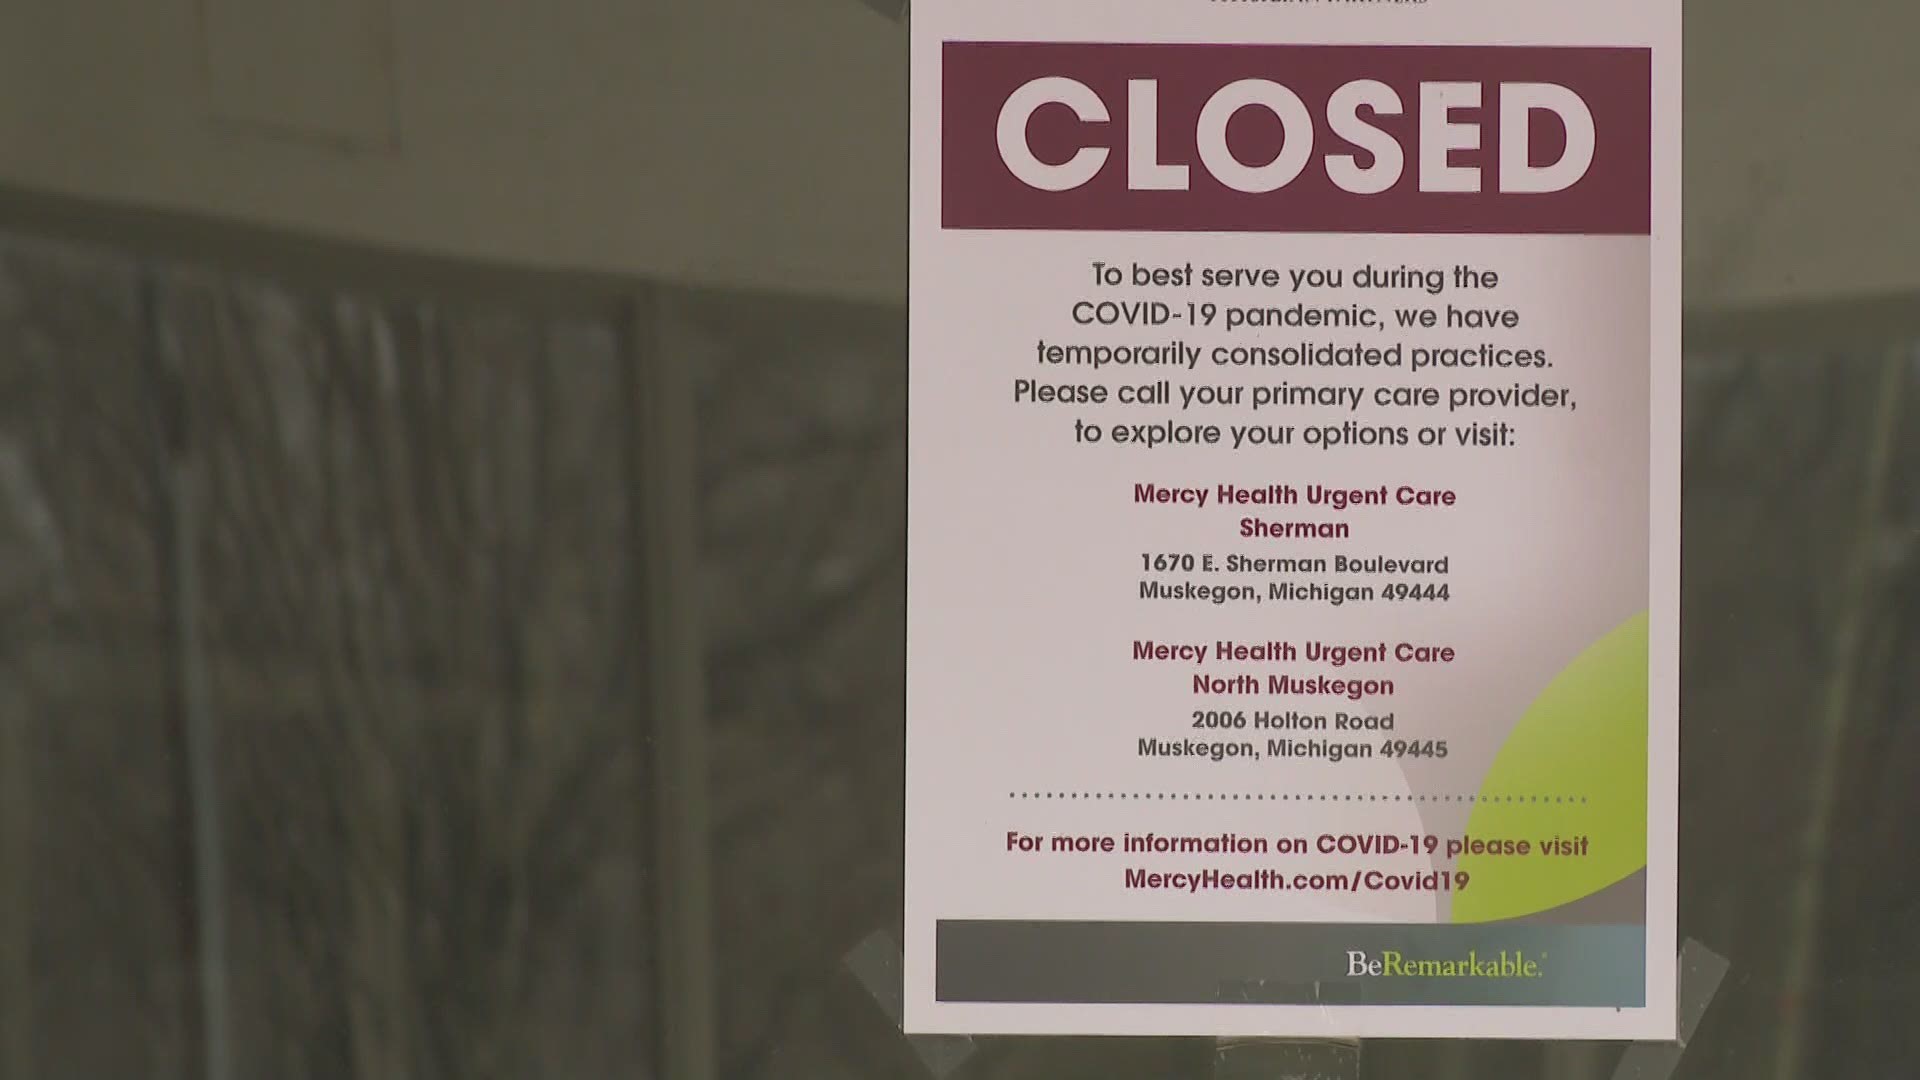 Two closed hospitals in the city of Muskegon will likely be demolished late this year or early next year.